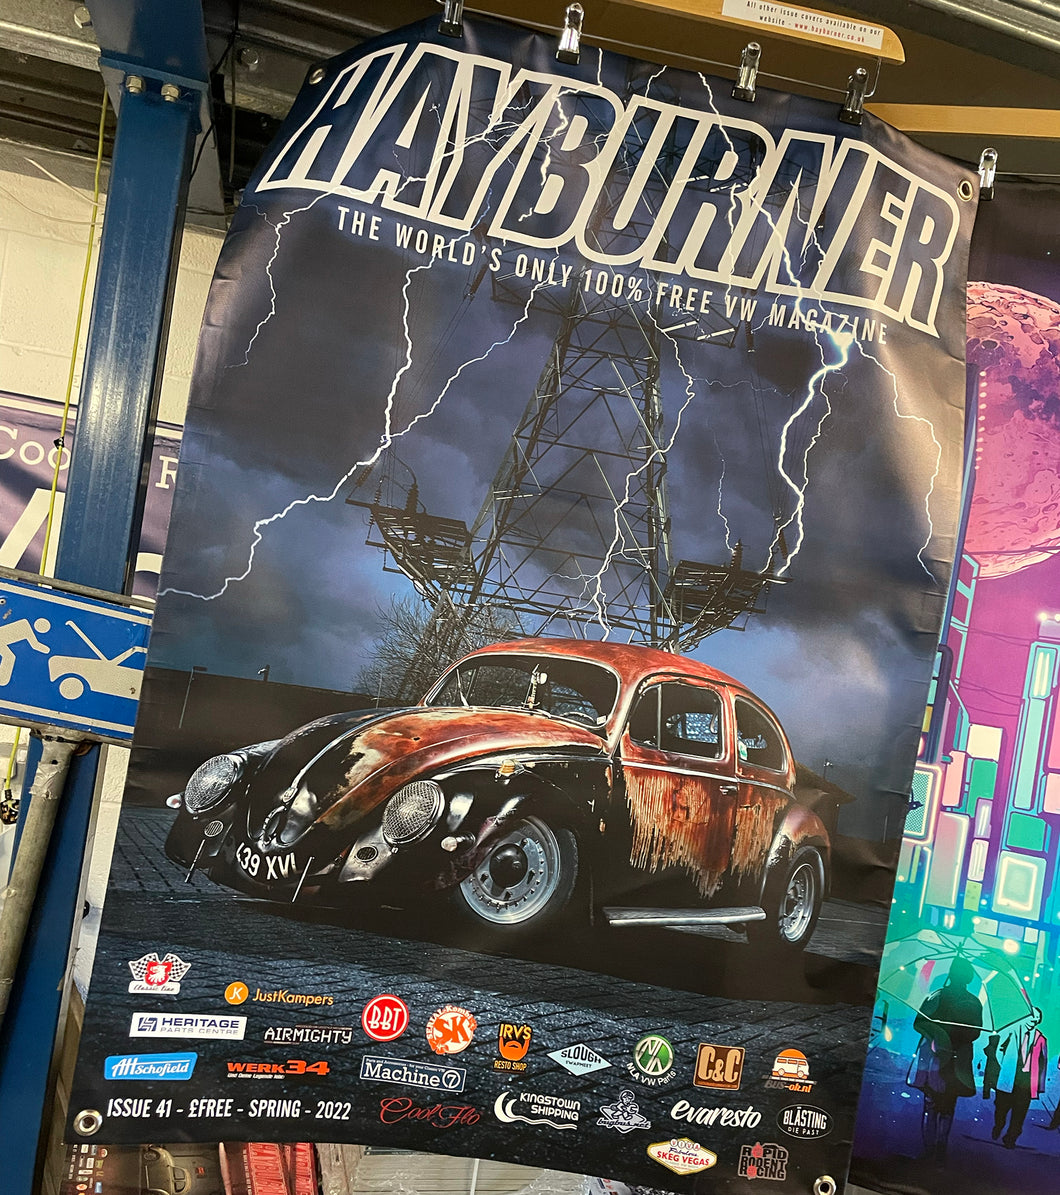 2022 Hayburner Front Cover Banner - Issue 41